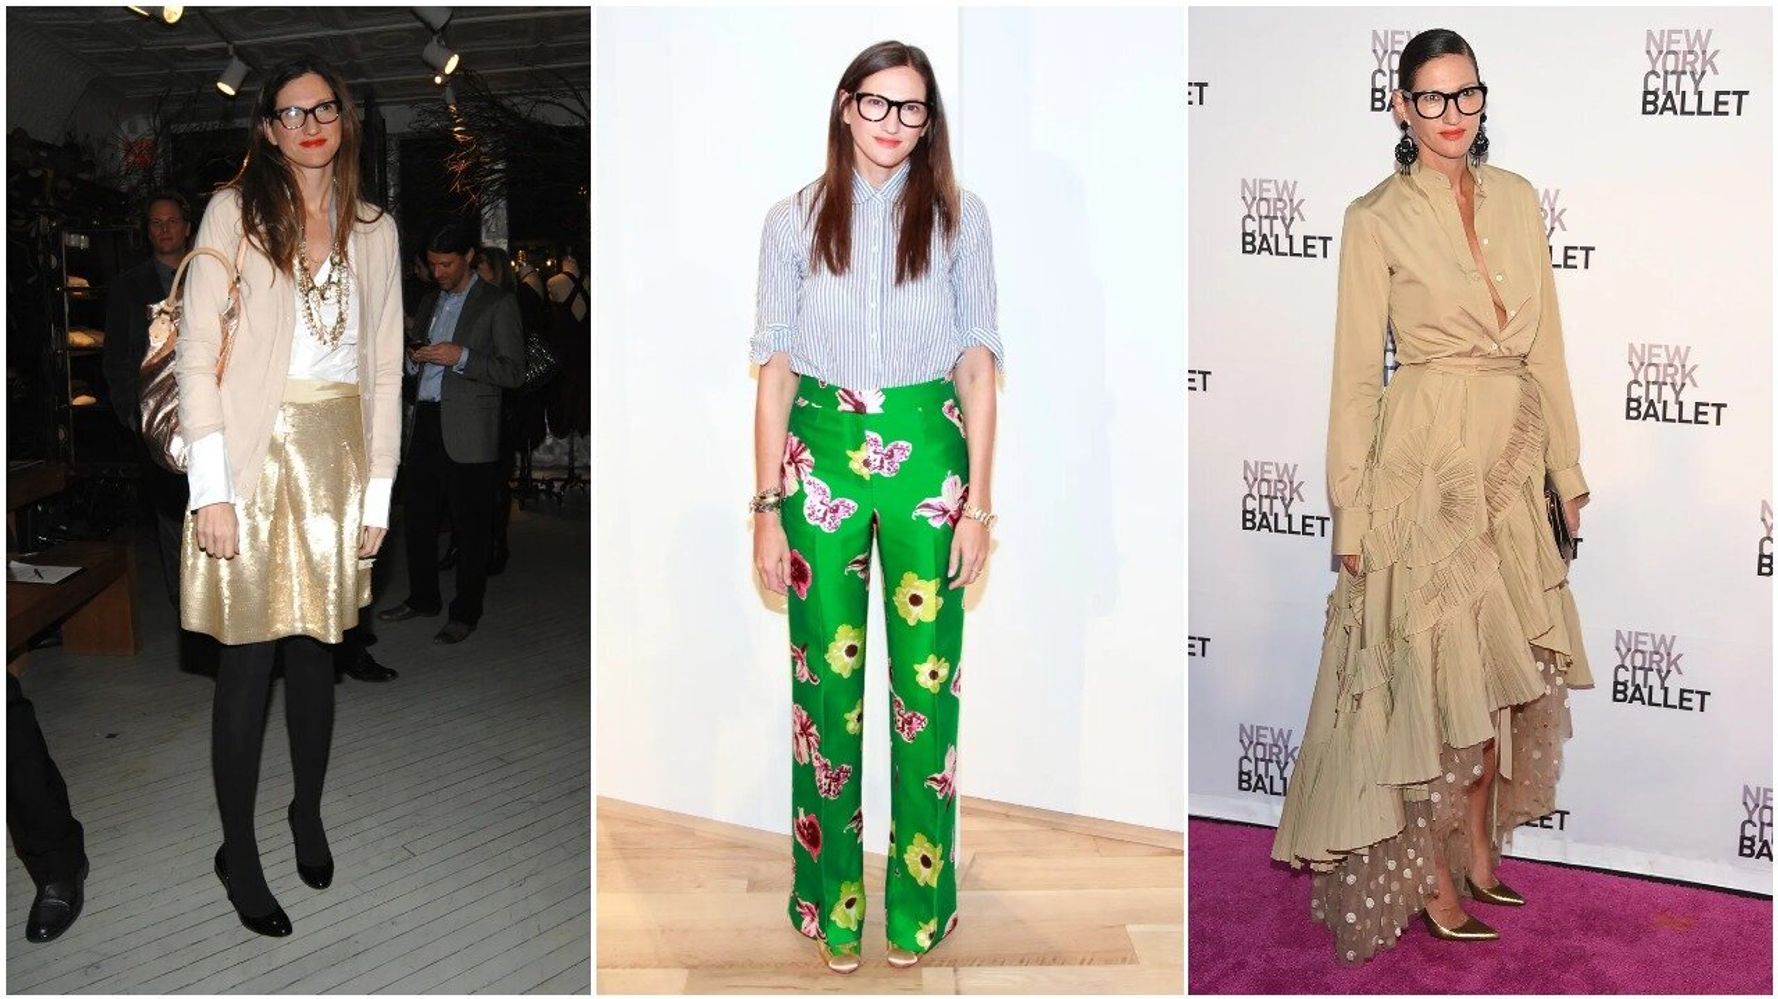 Jenna Lyons Gives Tips on Buying Designer Bags, Trends and More